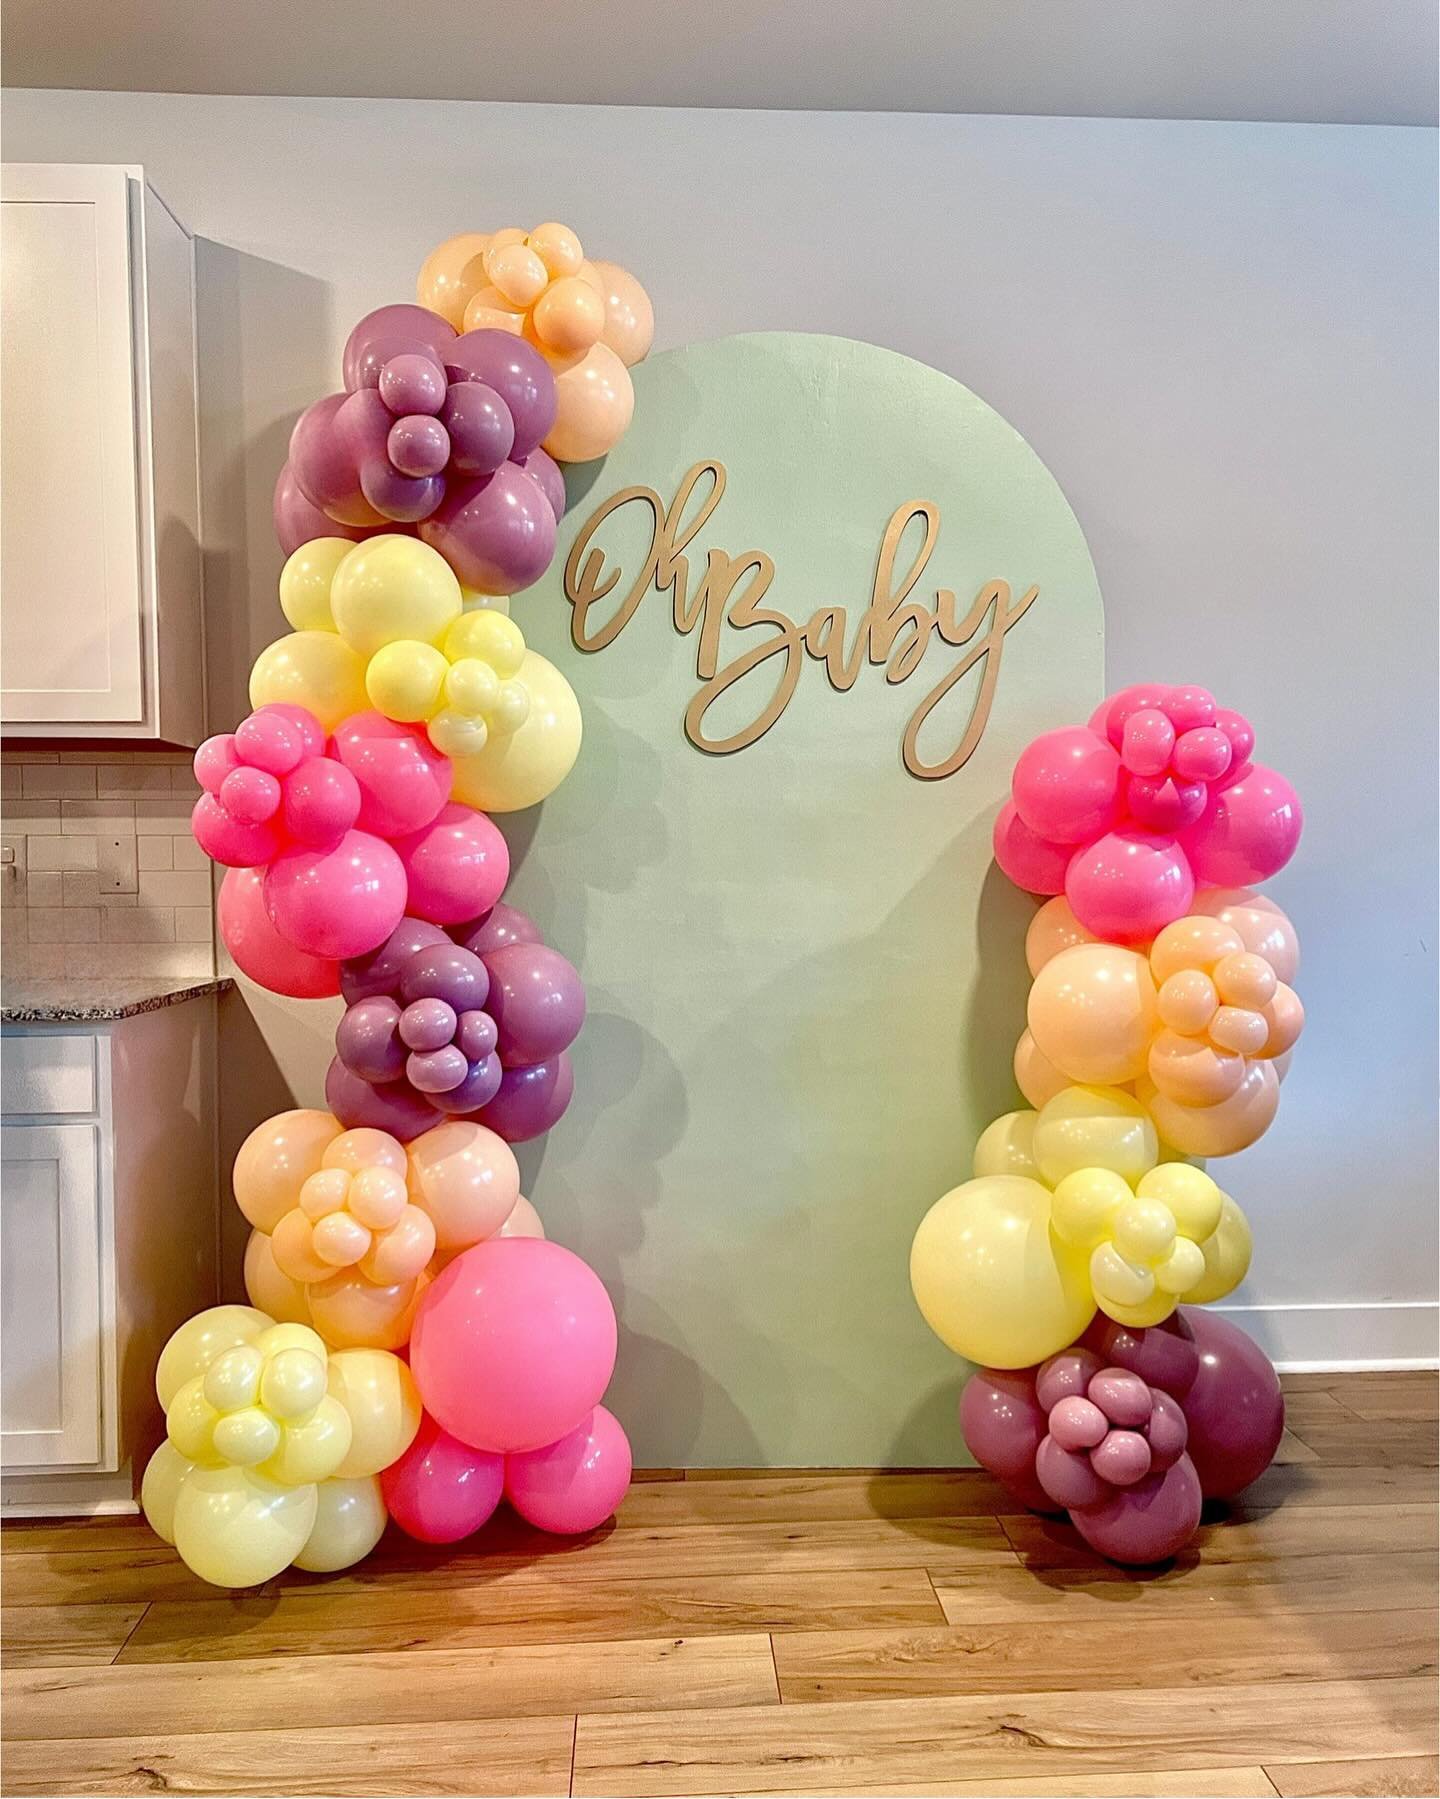 You&rsquo;ll always be my baby! 💗
-
Welcoming another baby girl in May! Can&rsquo;t wait to love on my second niece! 🥰

7&rsquo; Arch Backdrop $150
12ft Standard Garland $300
&ldquo;Oh Baby&rdquo; Gold Sign $40
+ $2.50 per mile delivery 

#ohbaby #